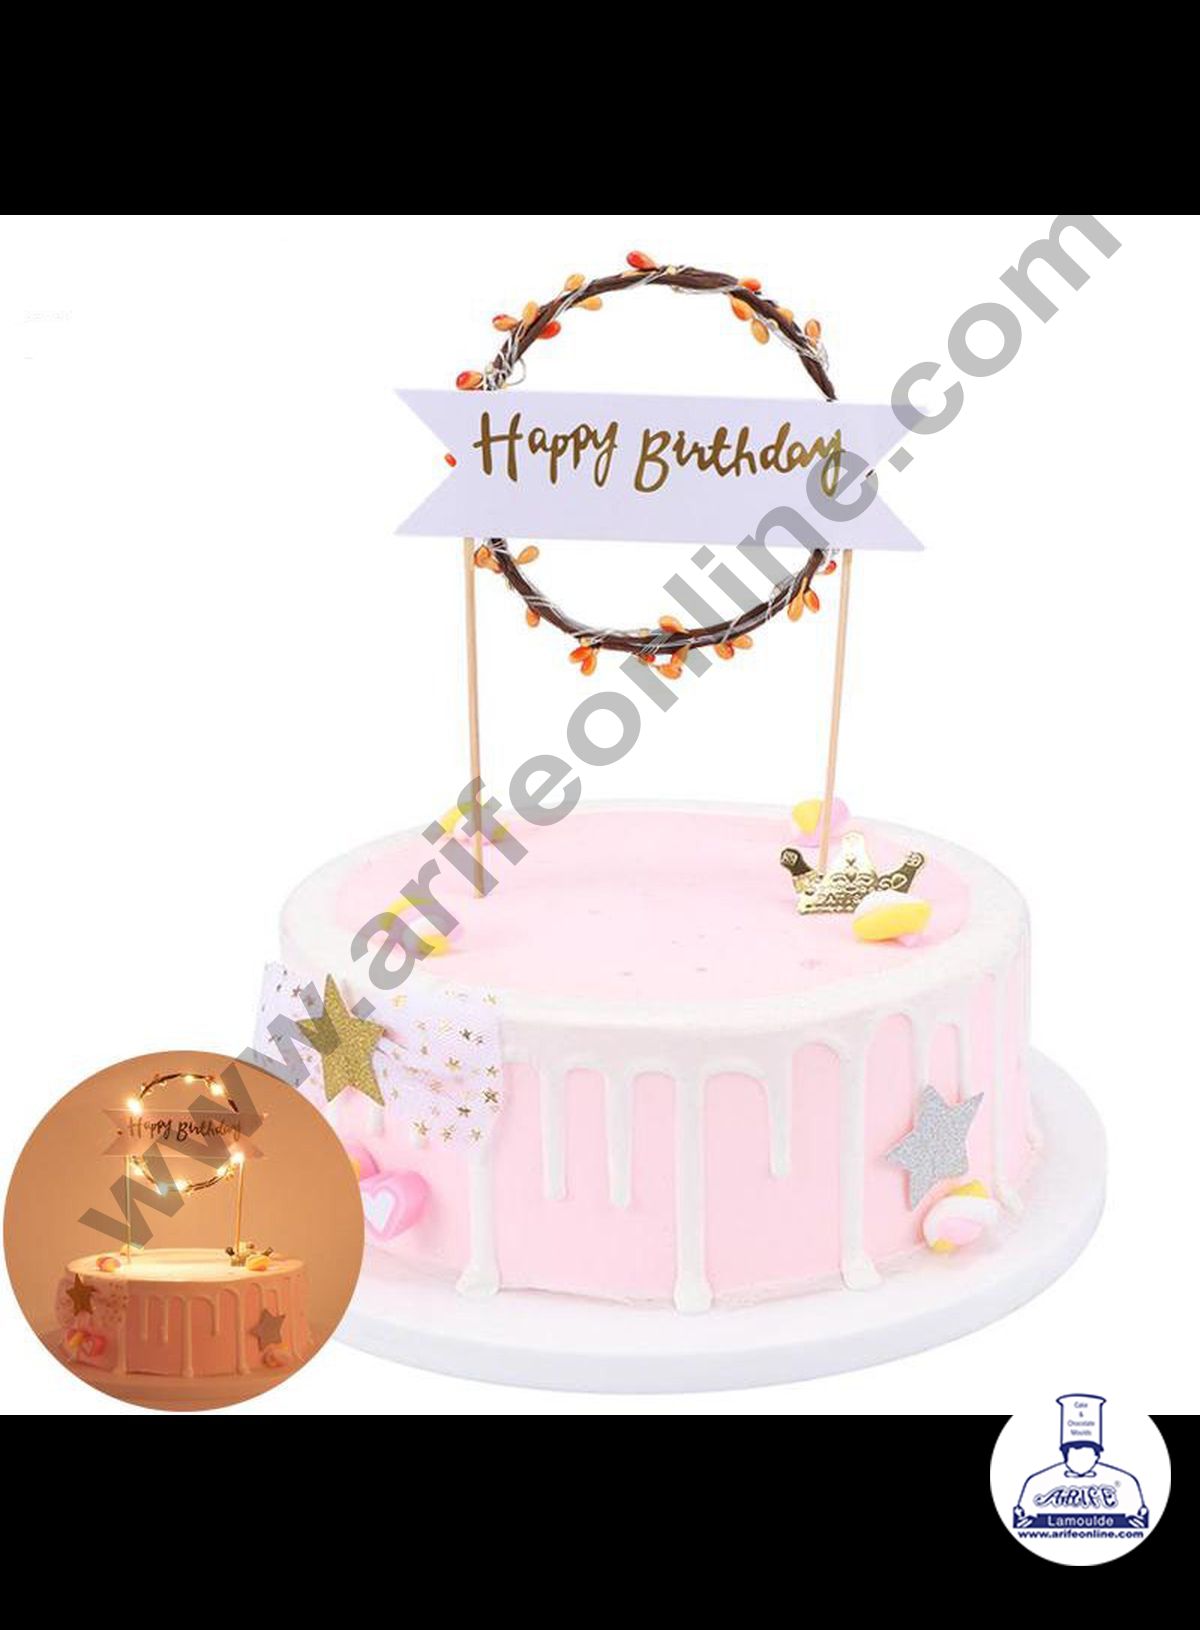 Amazon.com: ArtCreativity LED Numeric Birthday Cake Topper - Light Up  Number Cake Toppers with 3 Eye-Catching Modes - Anniversary and Birthday  Cake Decorations - LED Cake Decor for Any Age (#4) : Toys & Games